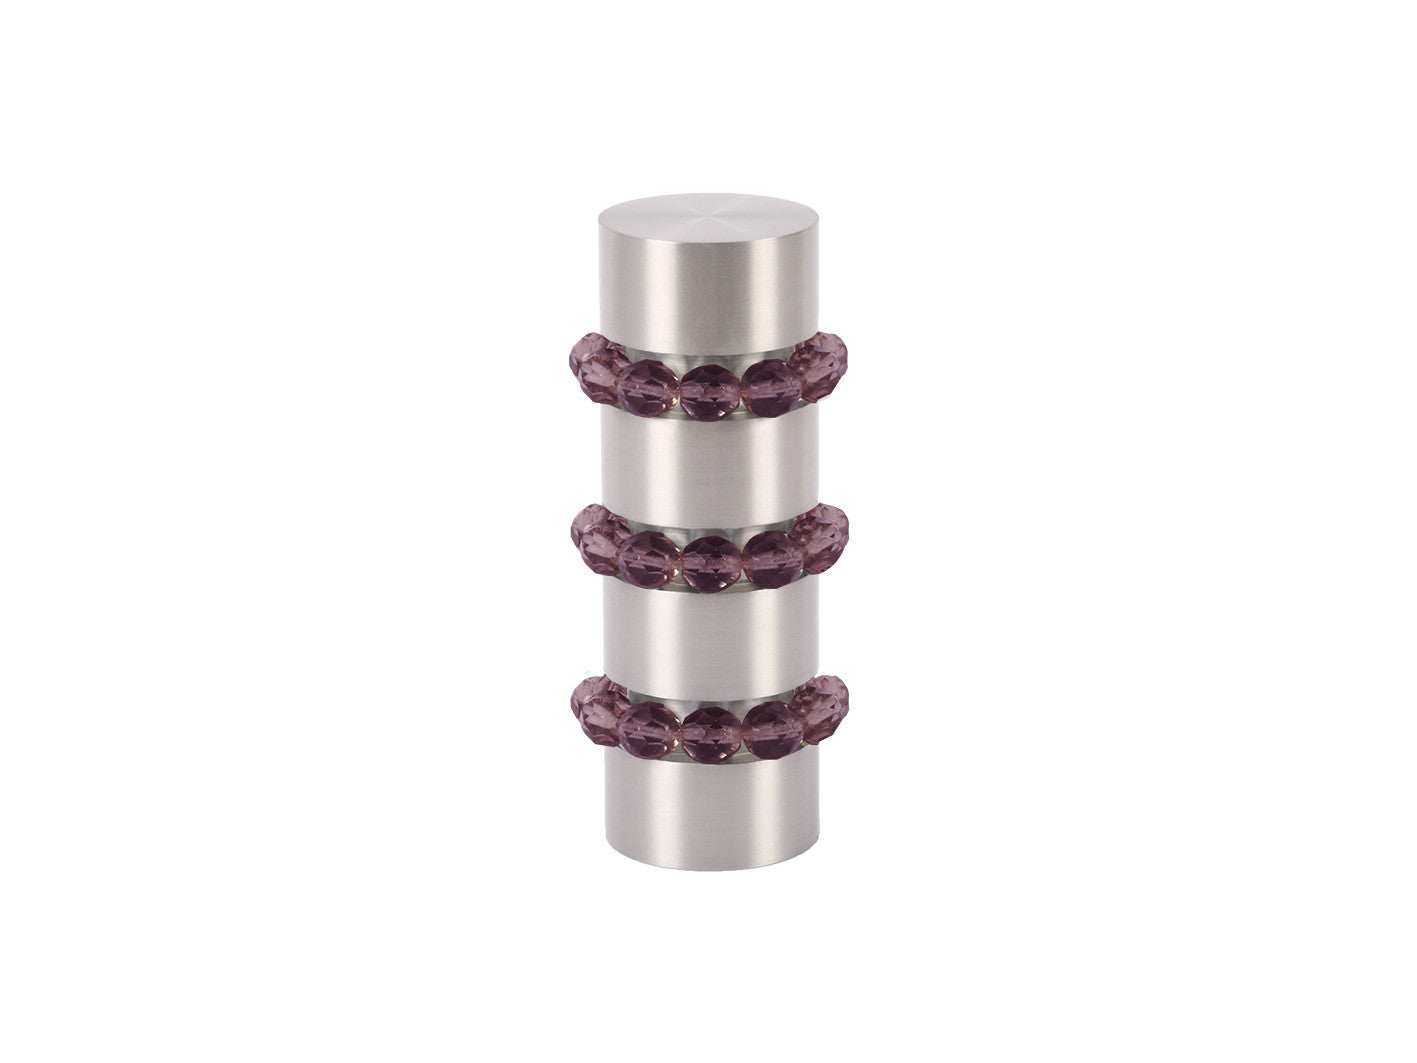 Beaded stainless steel curtain pole finial in mulberry purple glass | Walcot House 19mm collection